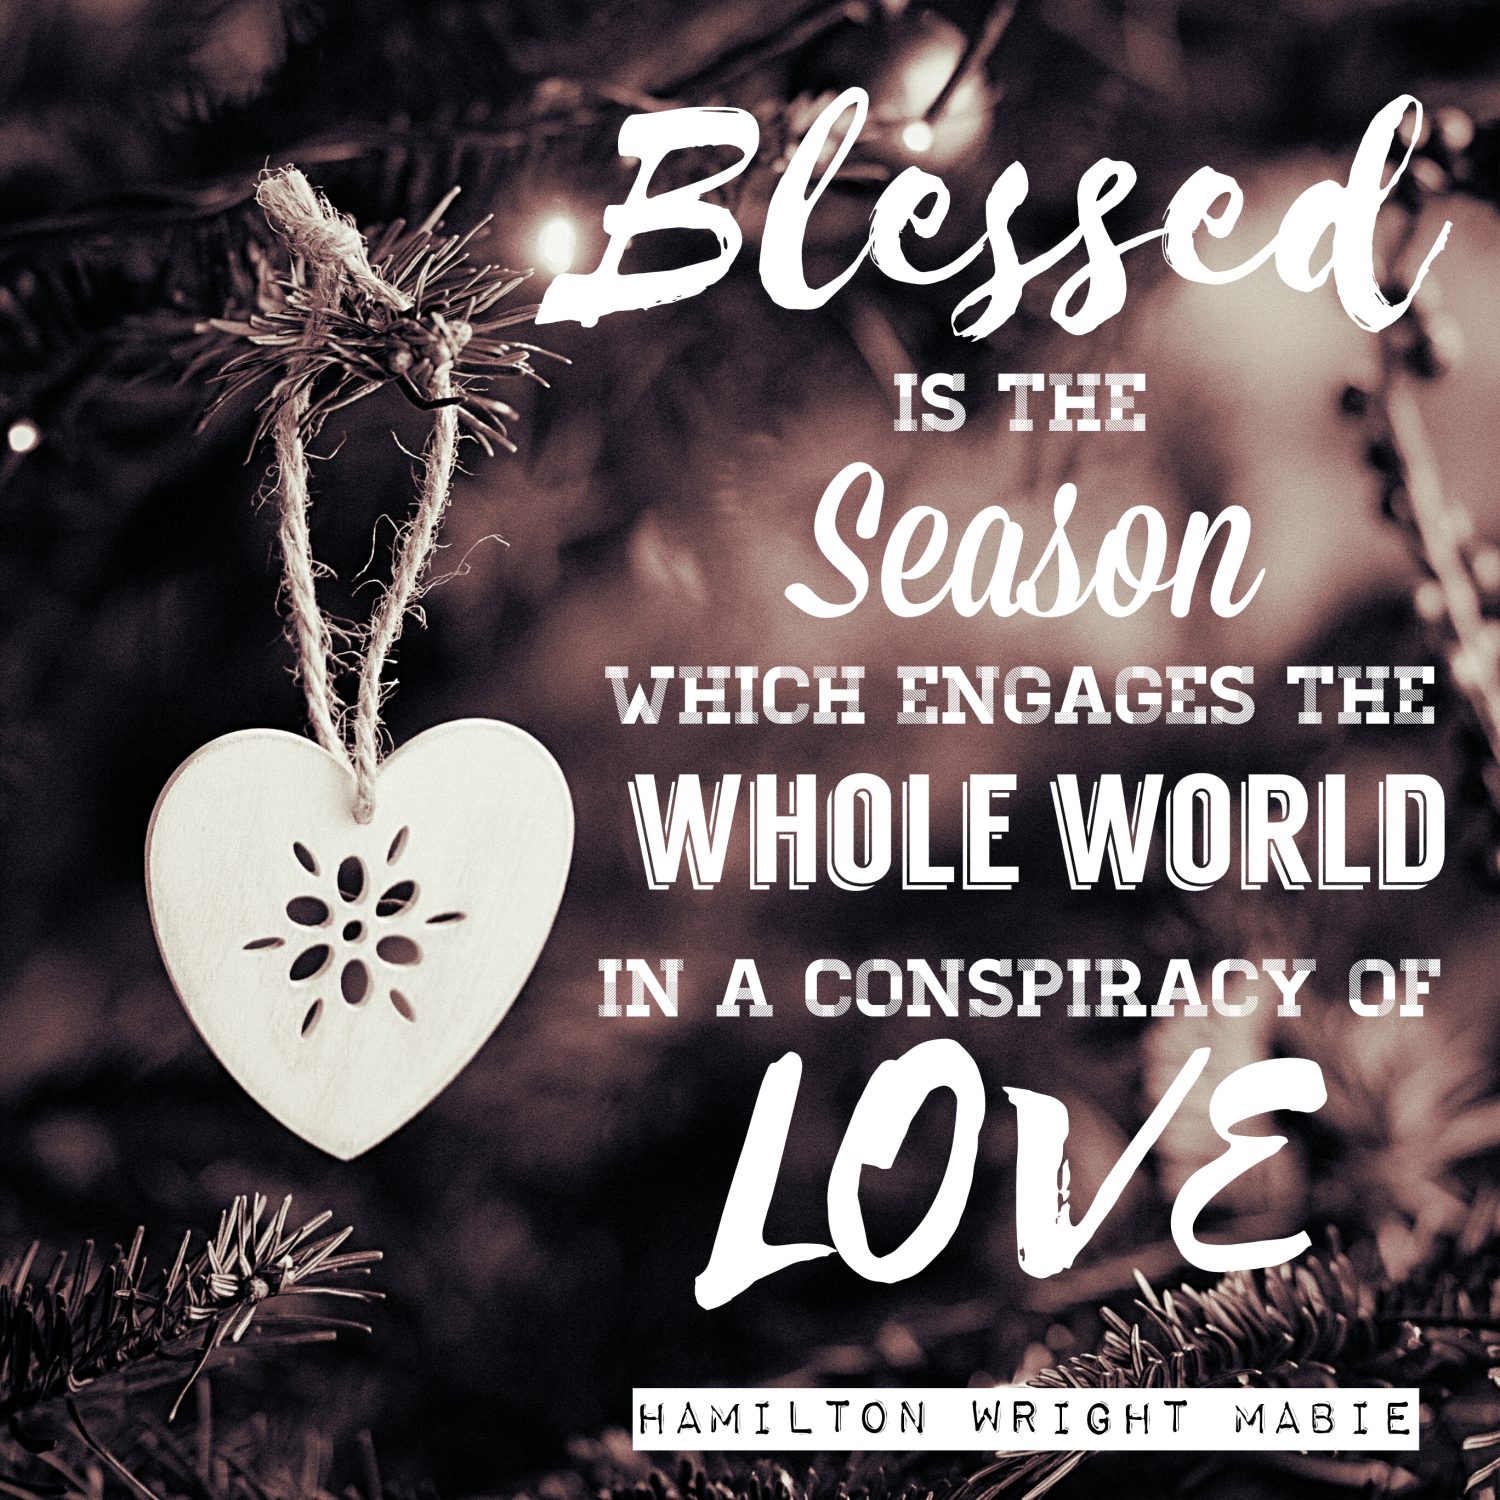 Blessed is the season which engages the whole world in a conspiracy of love. (Hamilton Wright Mabie)